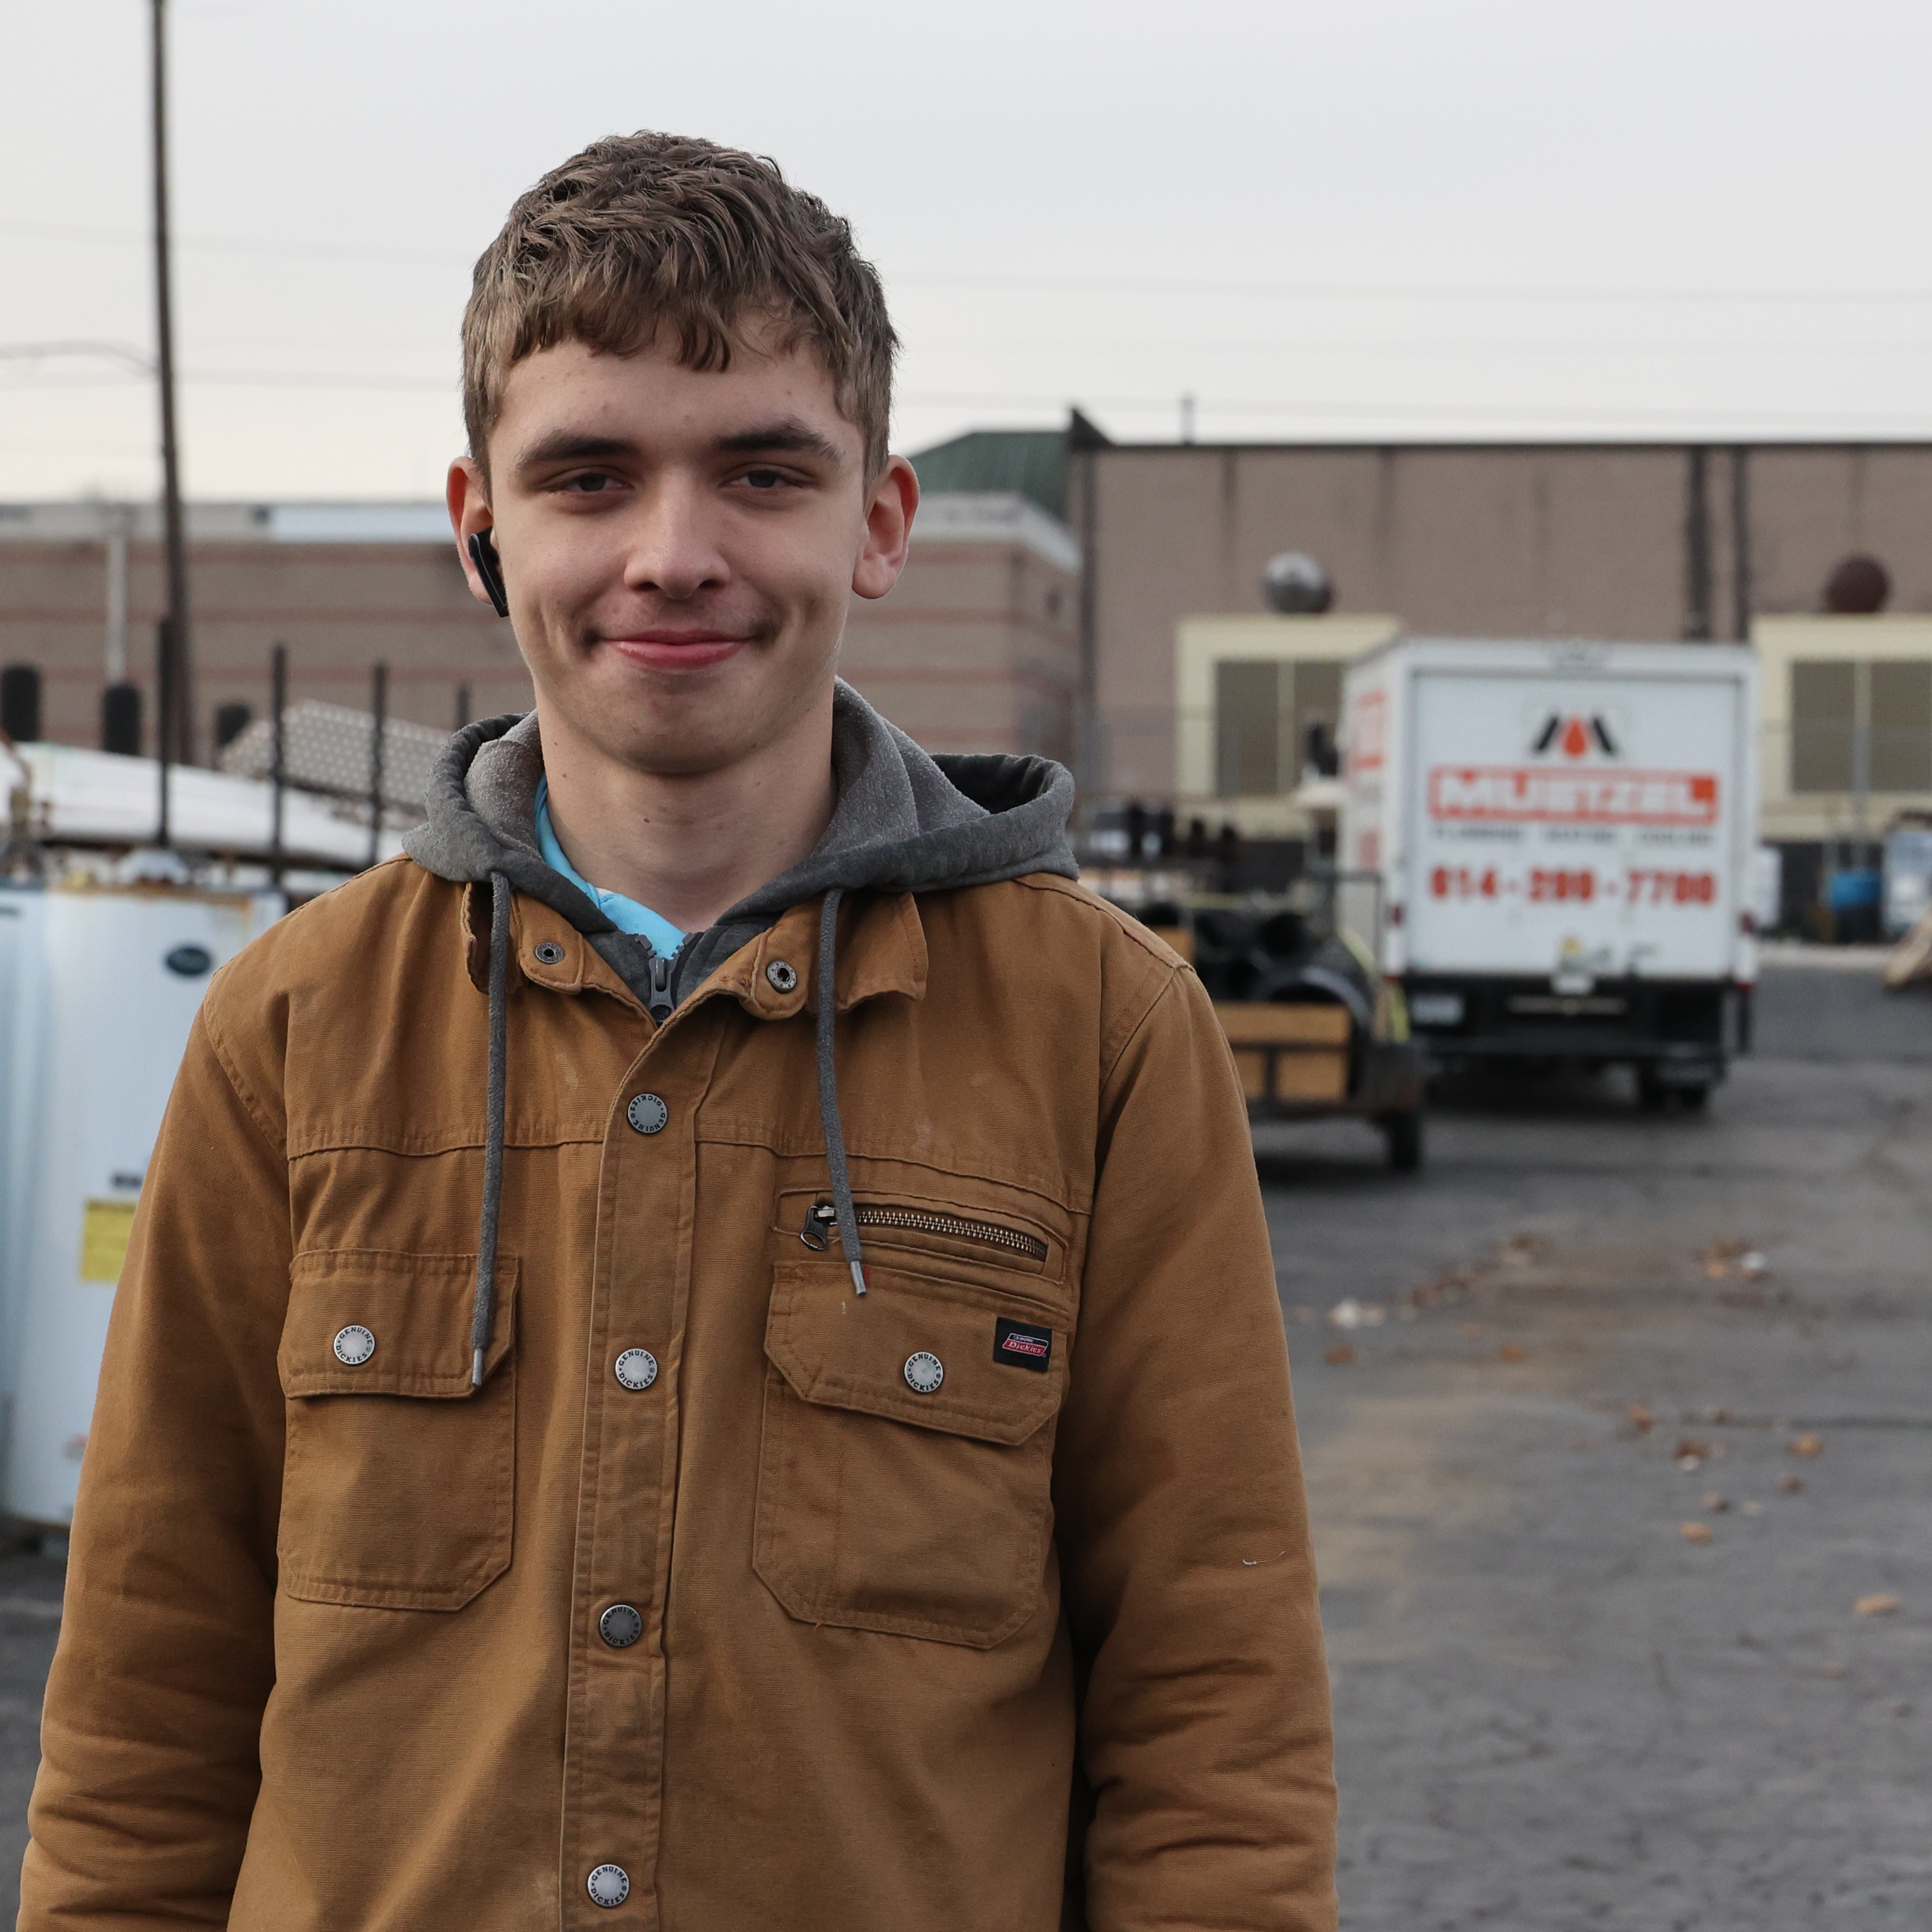 A White, male student stands in the parking lot of a warehouse wearing a brown winter jacket with cargo trucks parked behind him.